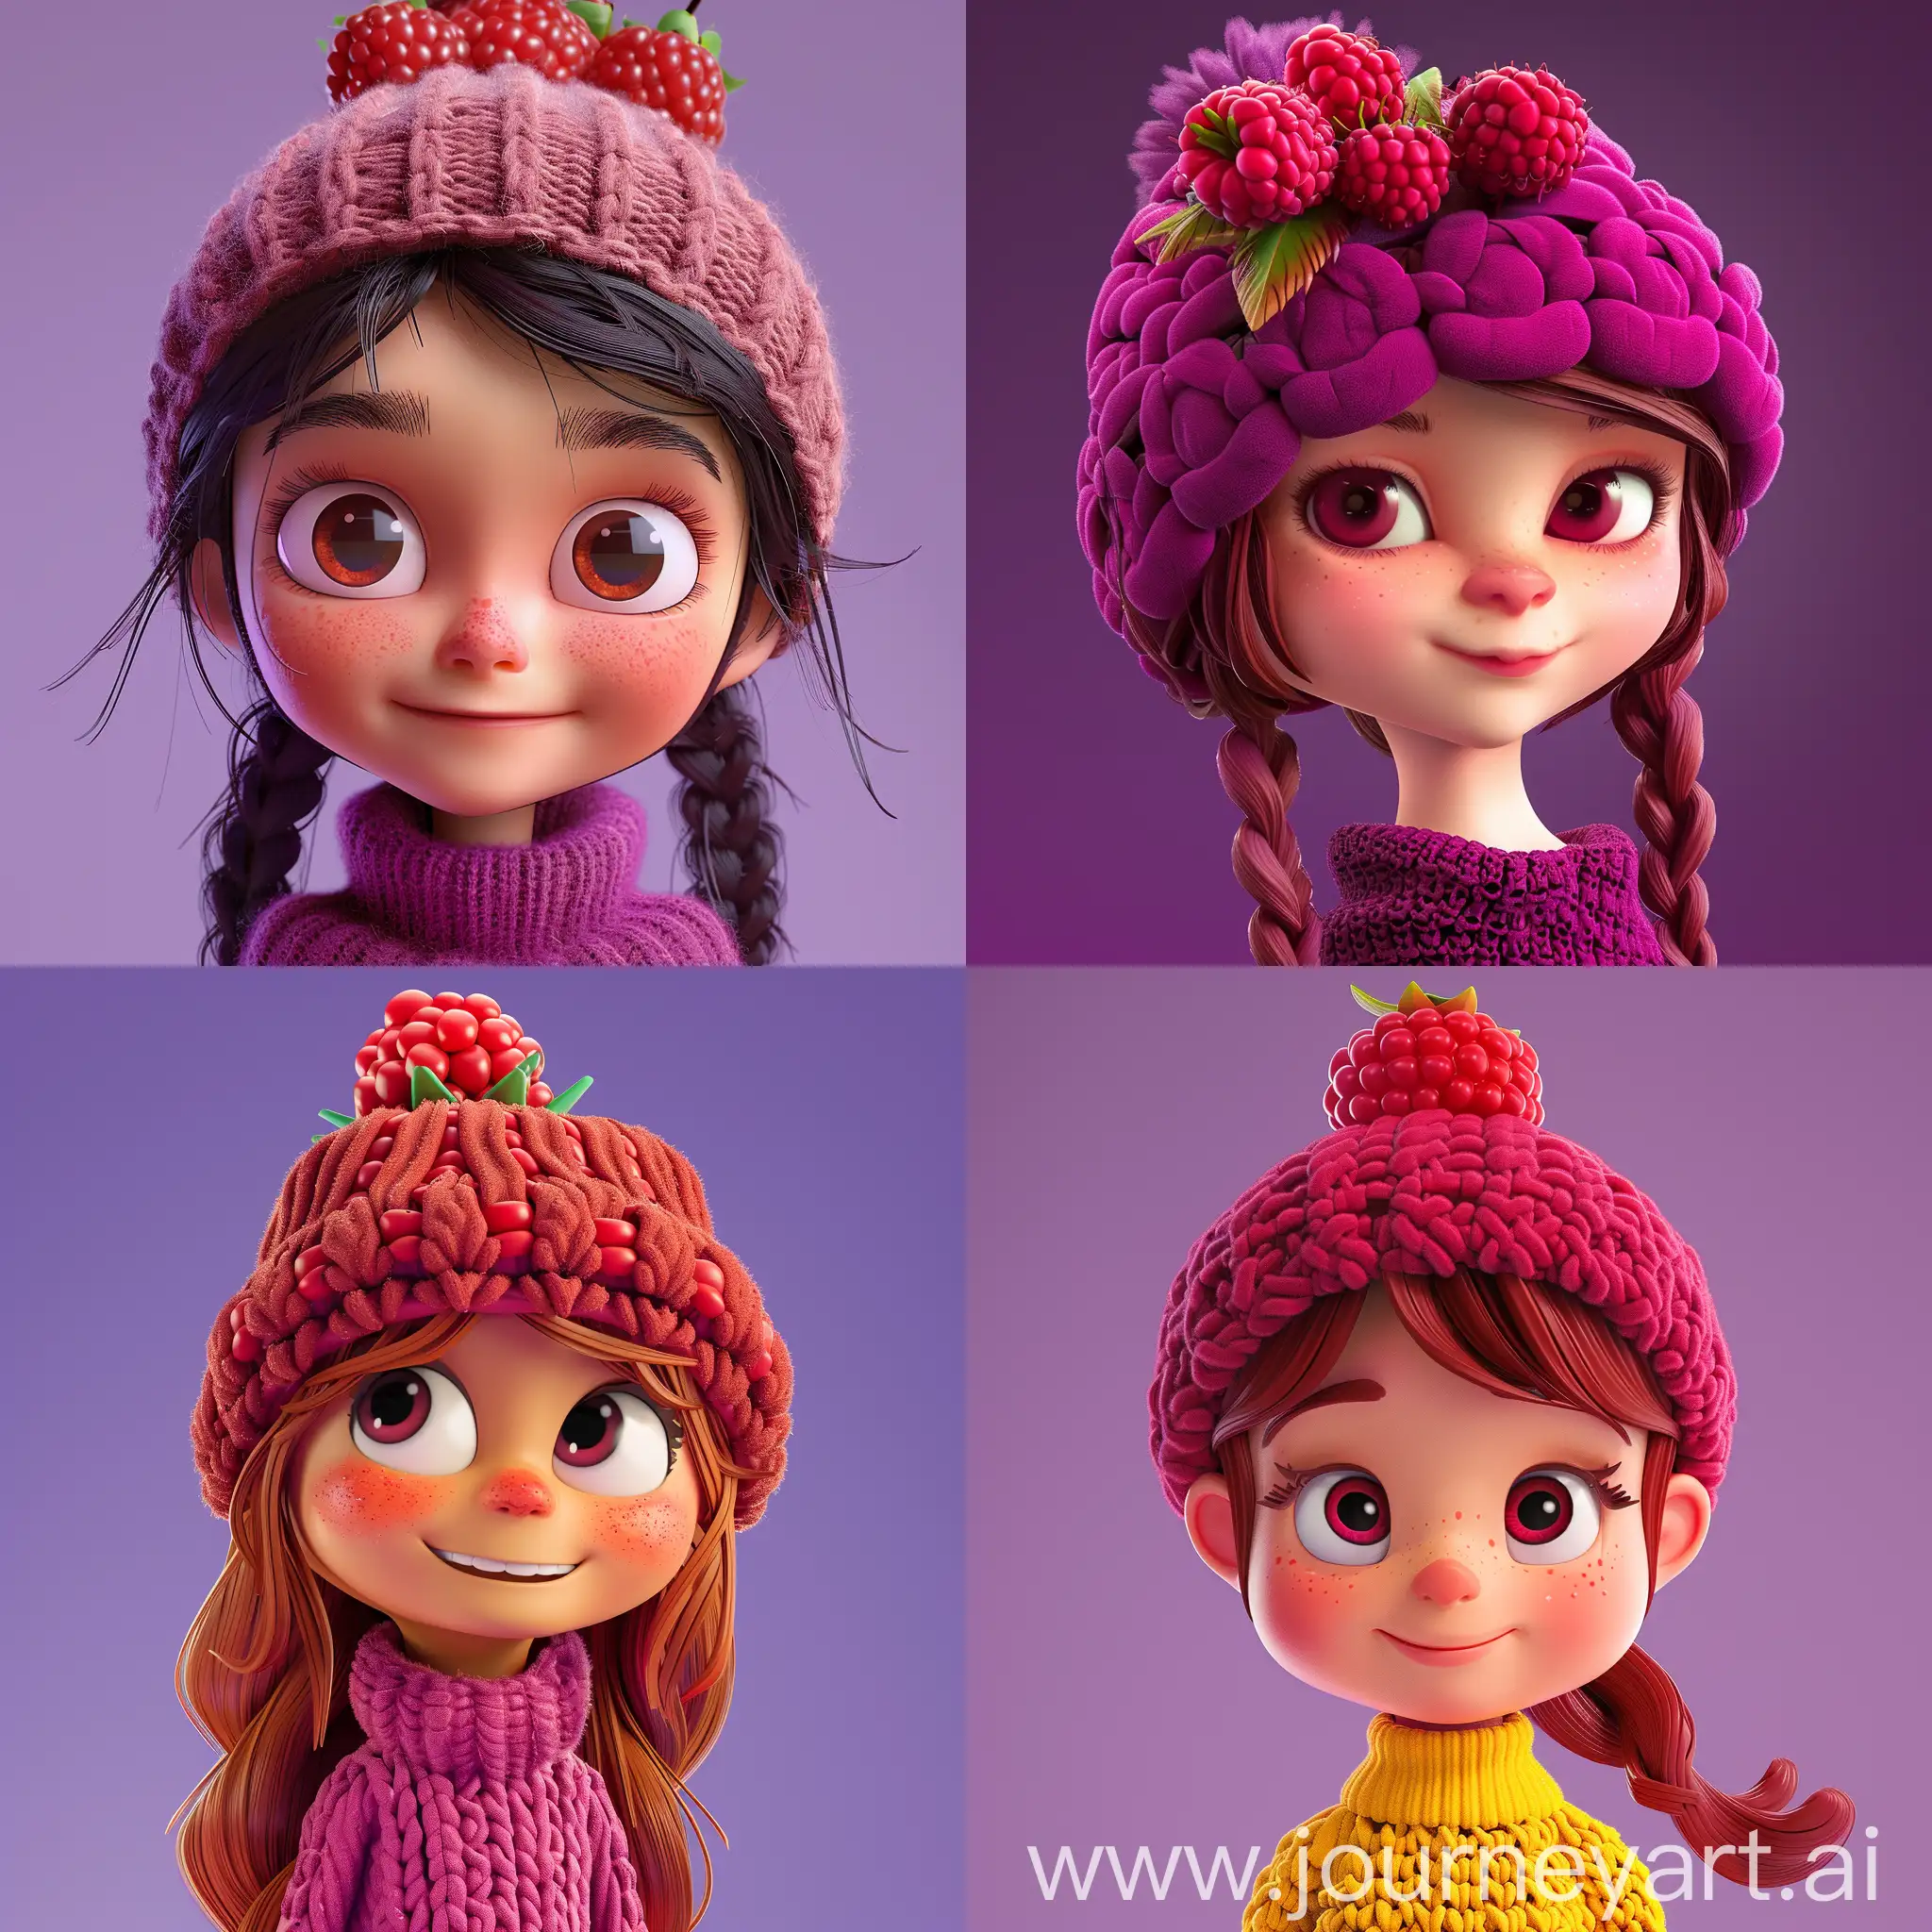 Cute-3D-Cartoon-Girl-with-Raspberry-Hat-on-Purple-Background